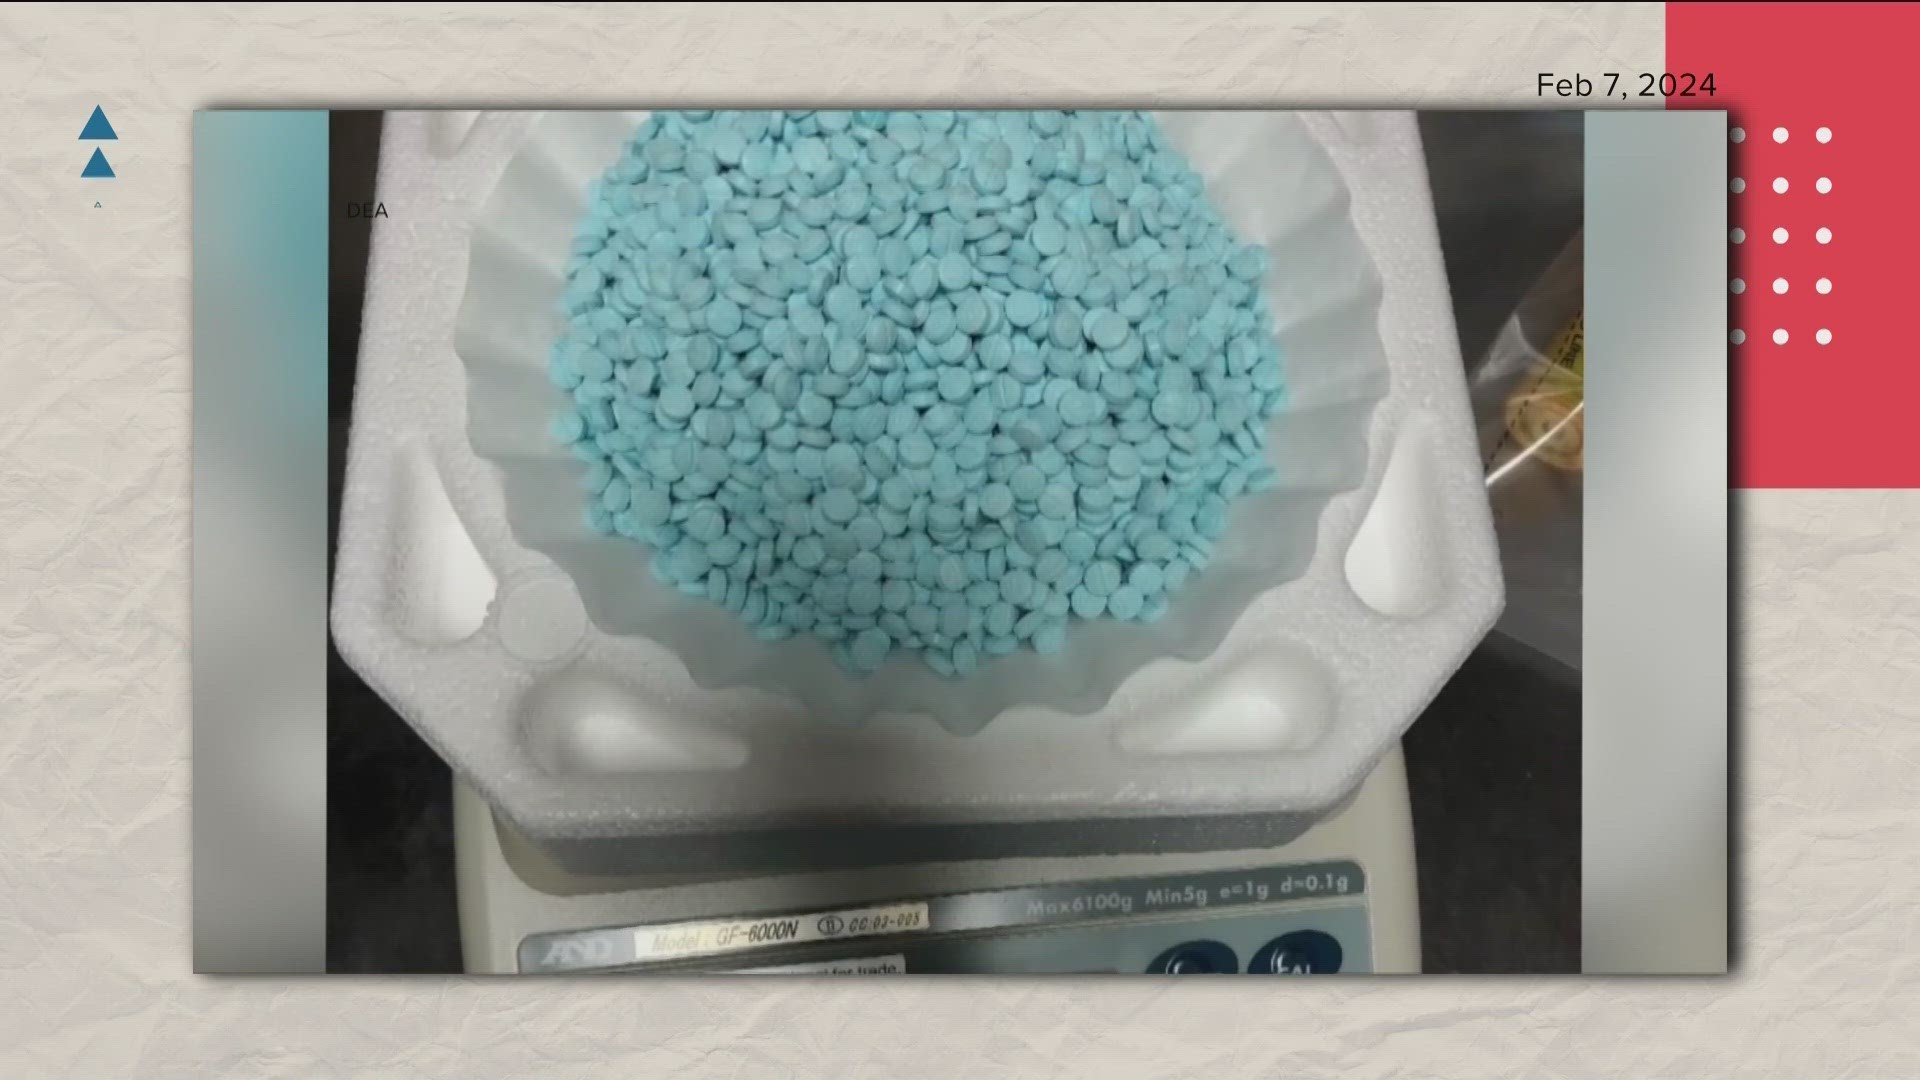 Idaho may become the next state to legalize fentanyl test strips. Under current code, testing strips for controlled substances are considered drug paraphernalia.